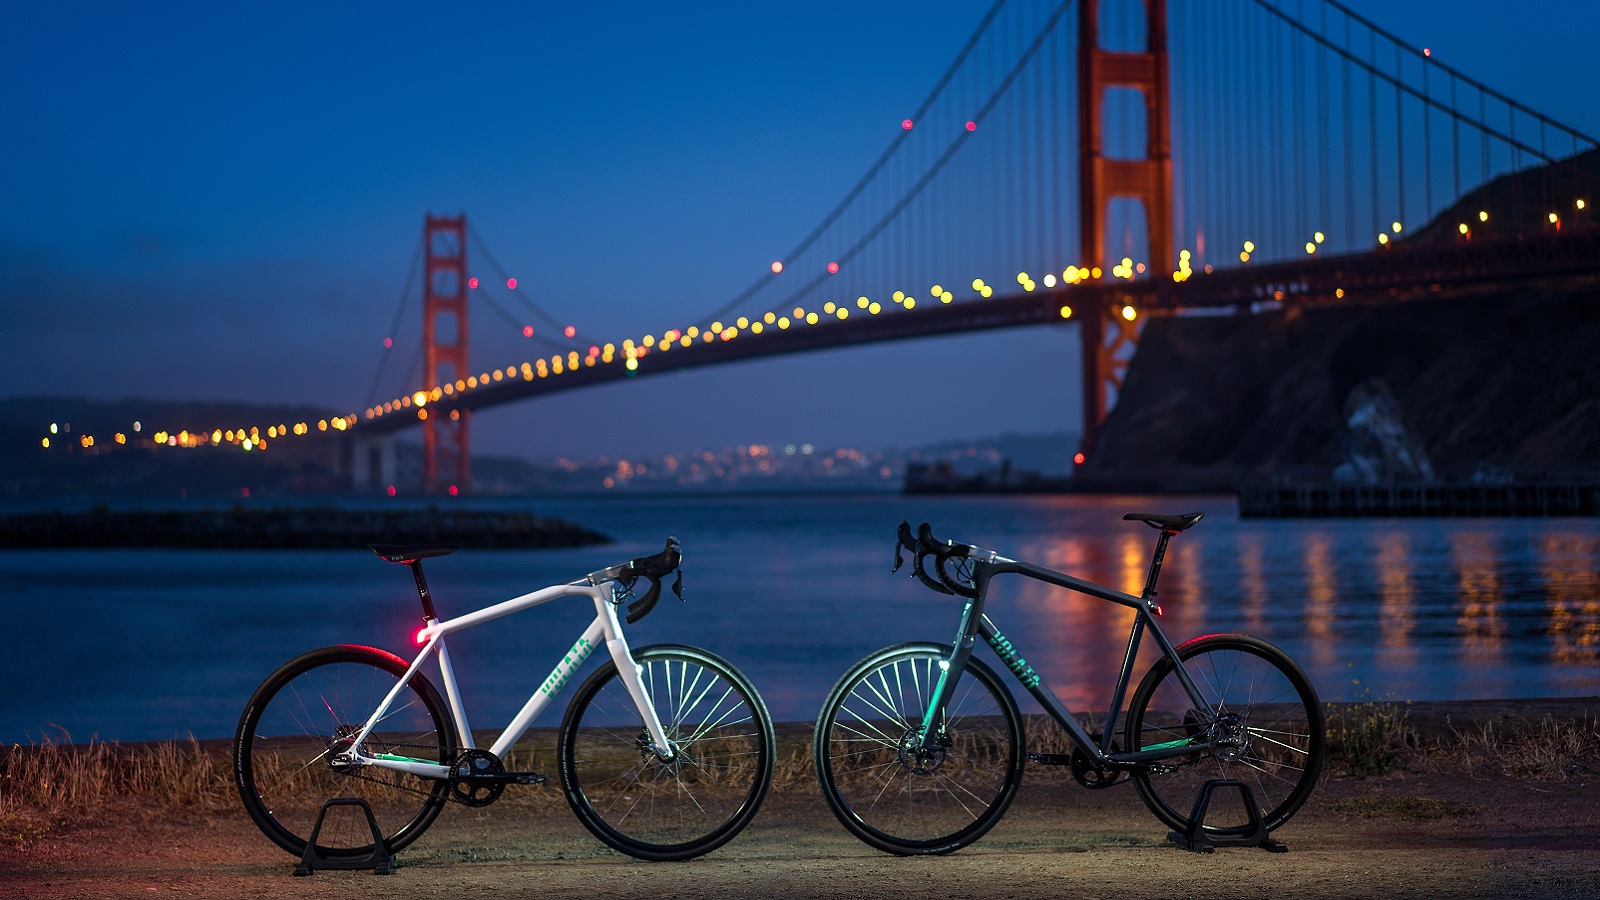 Is This the World’s First Smart Bicycle?